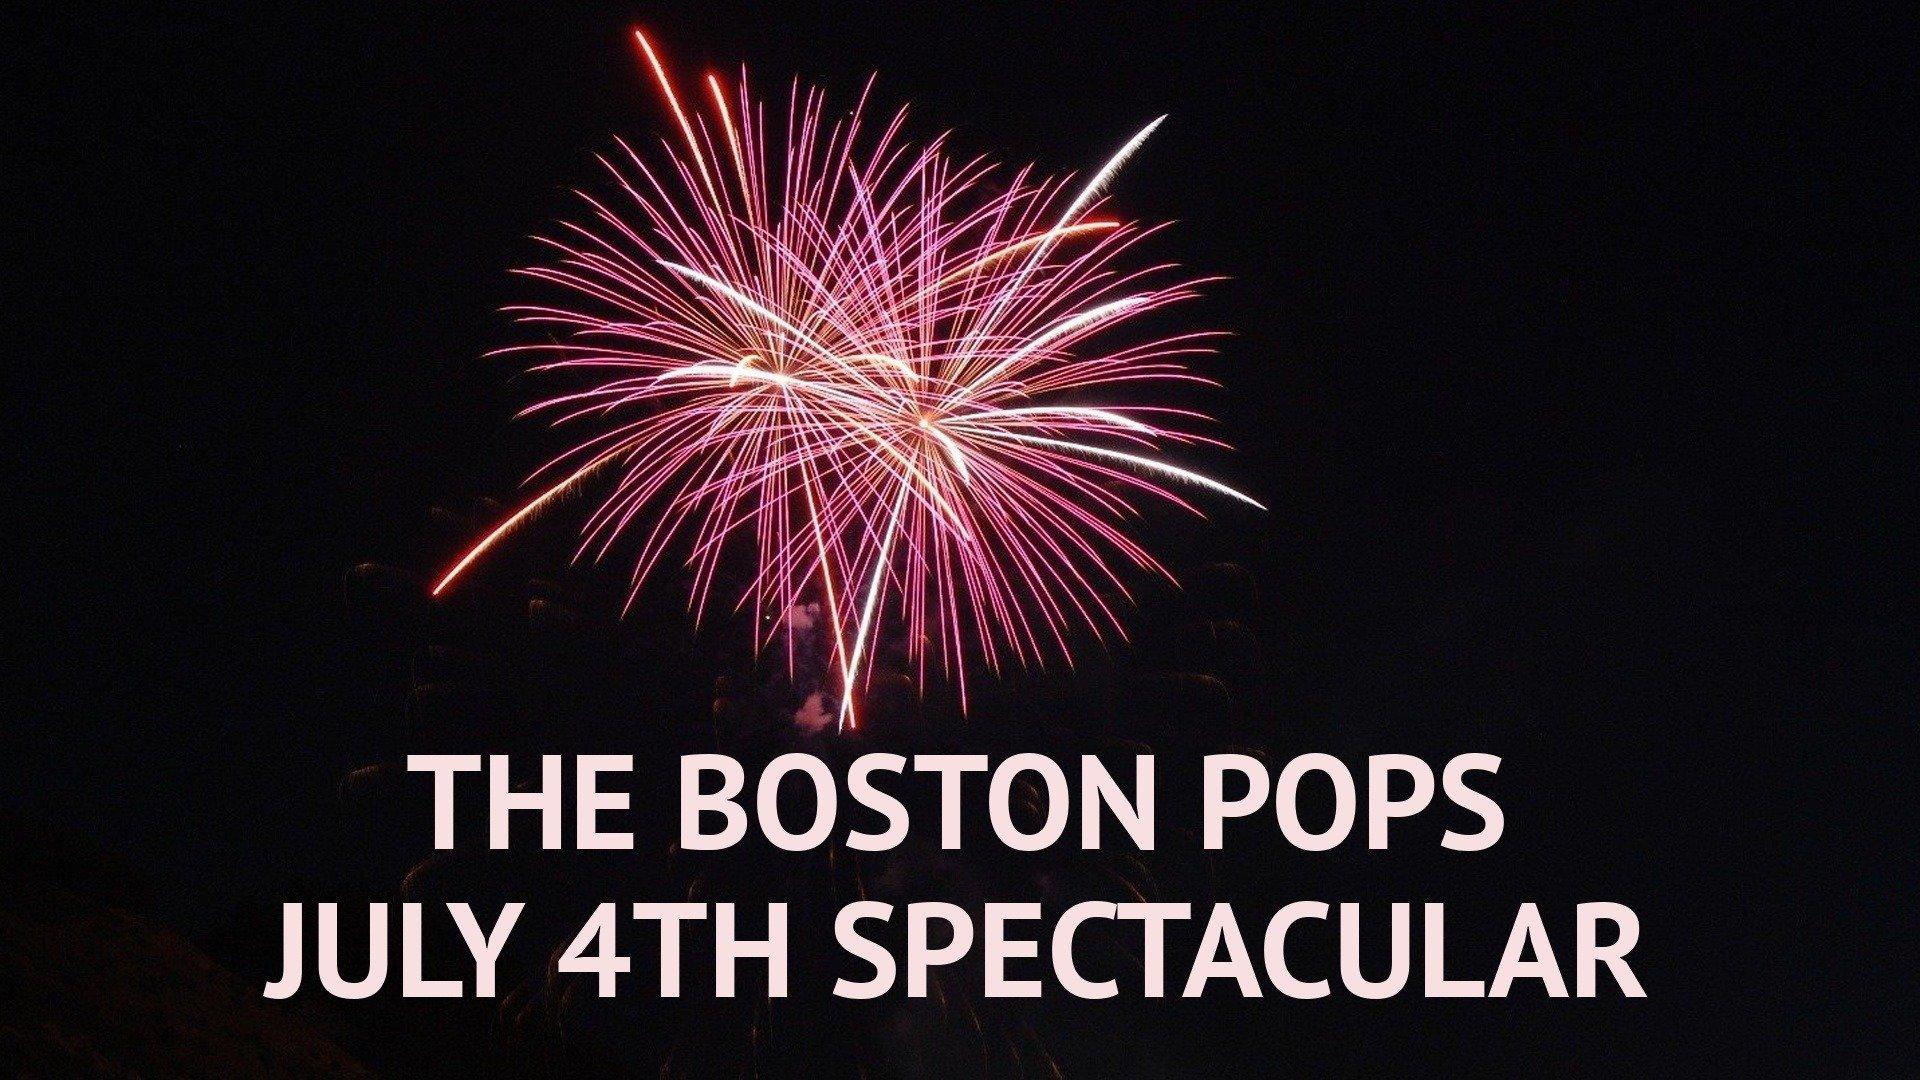 The Boston Pops July 4th Spectacular